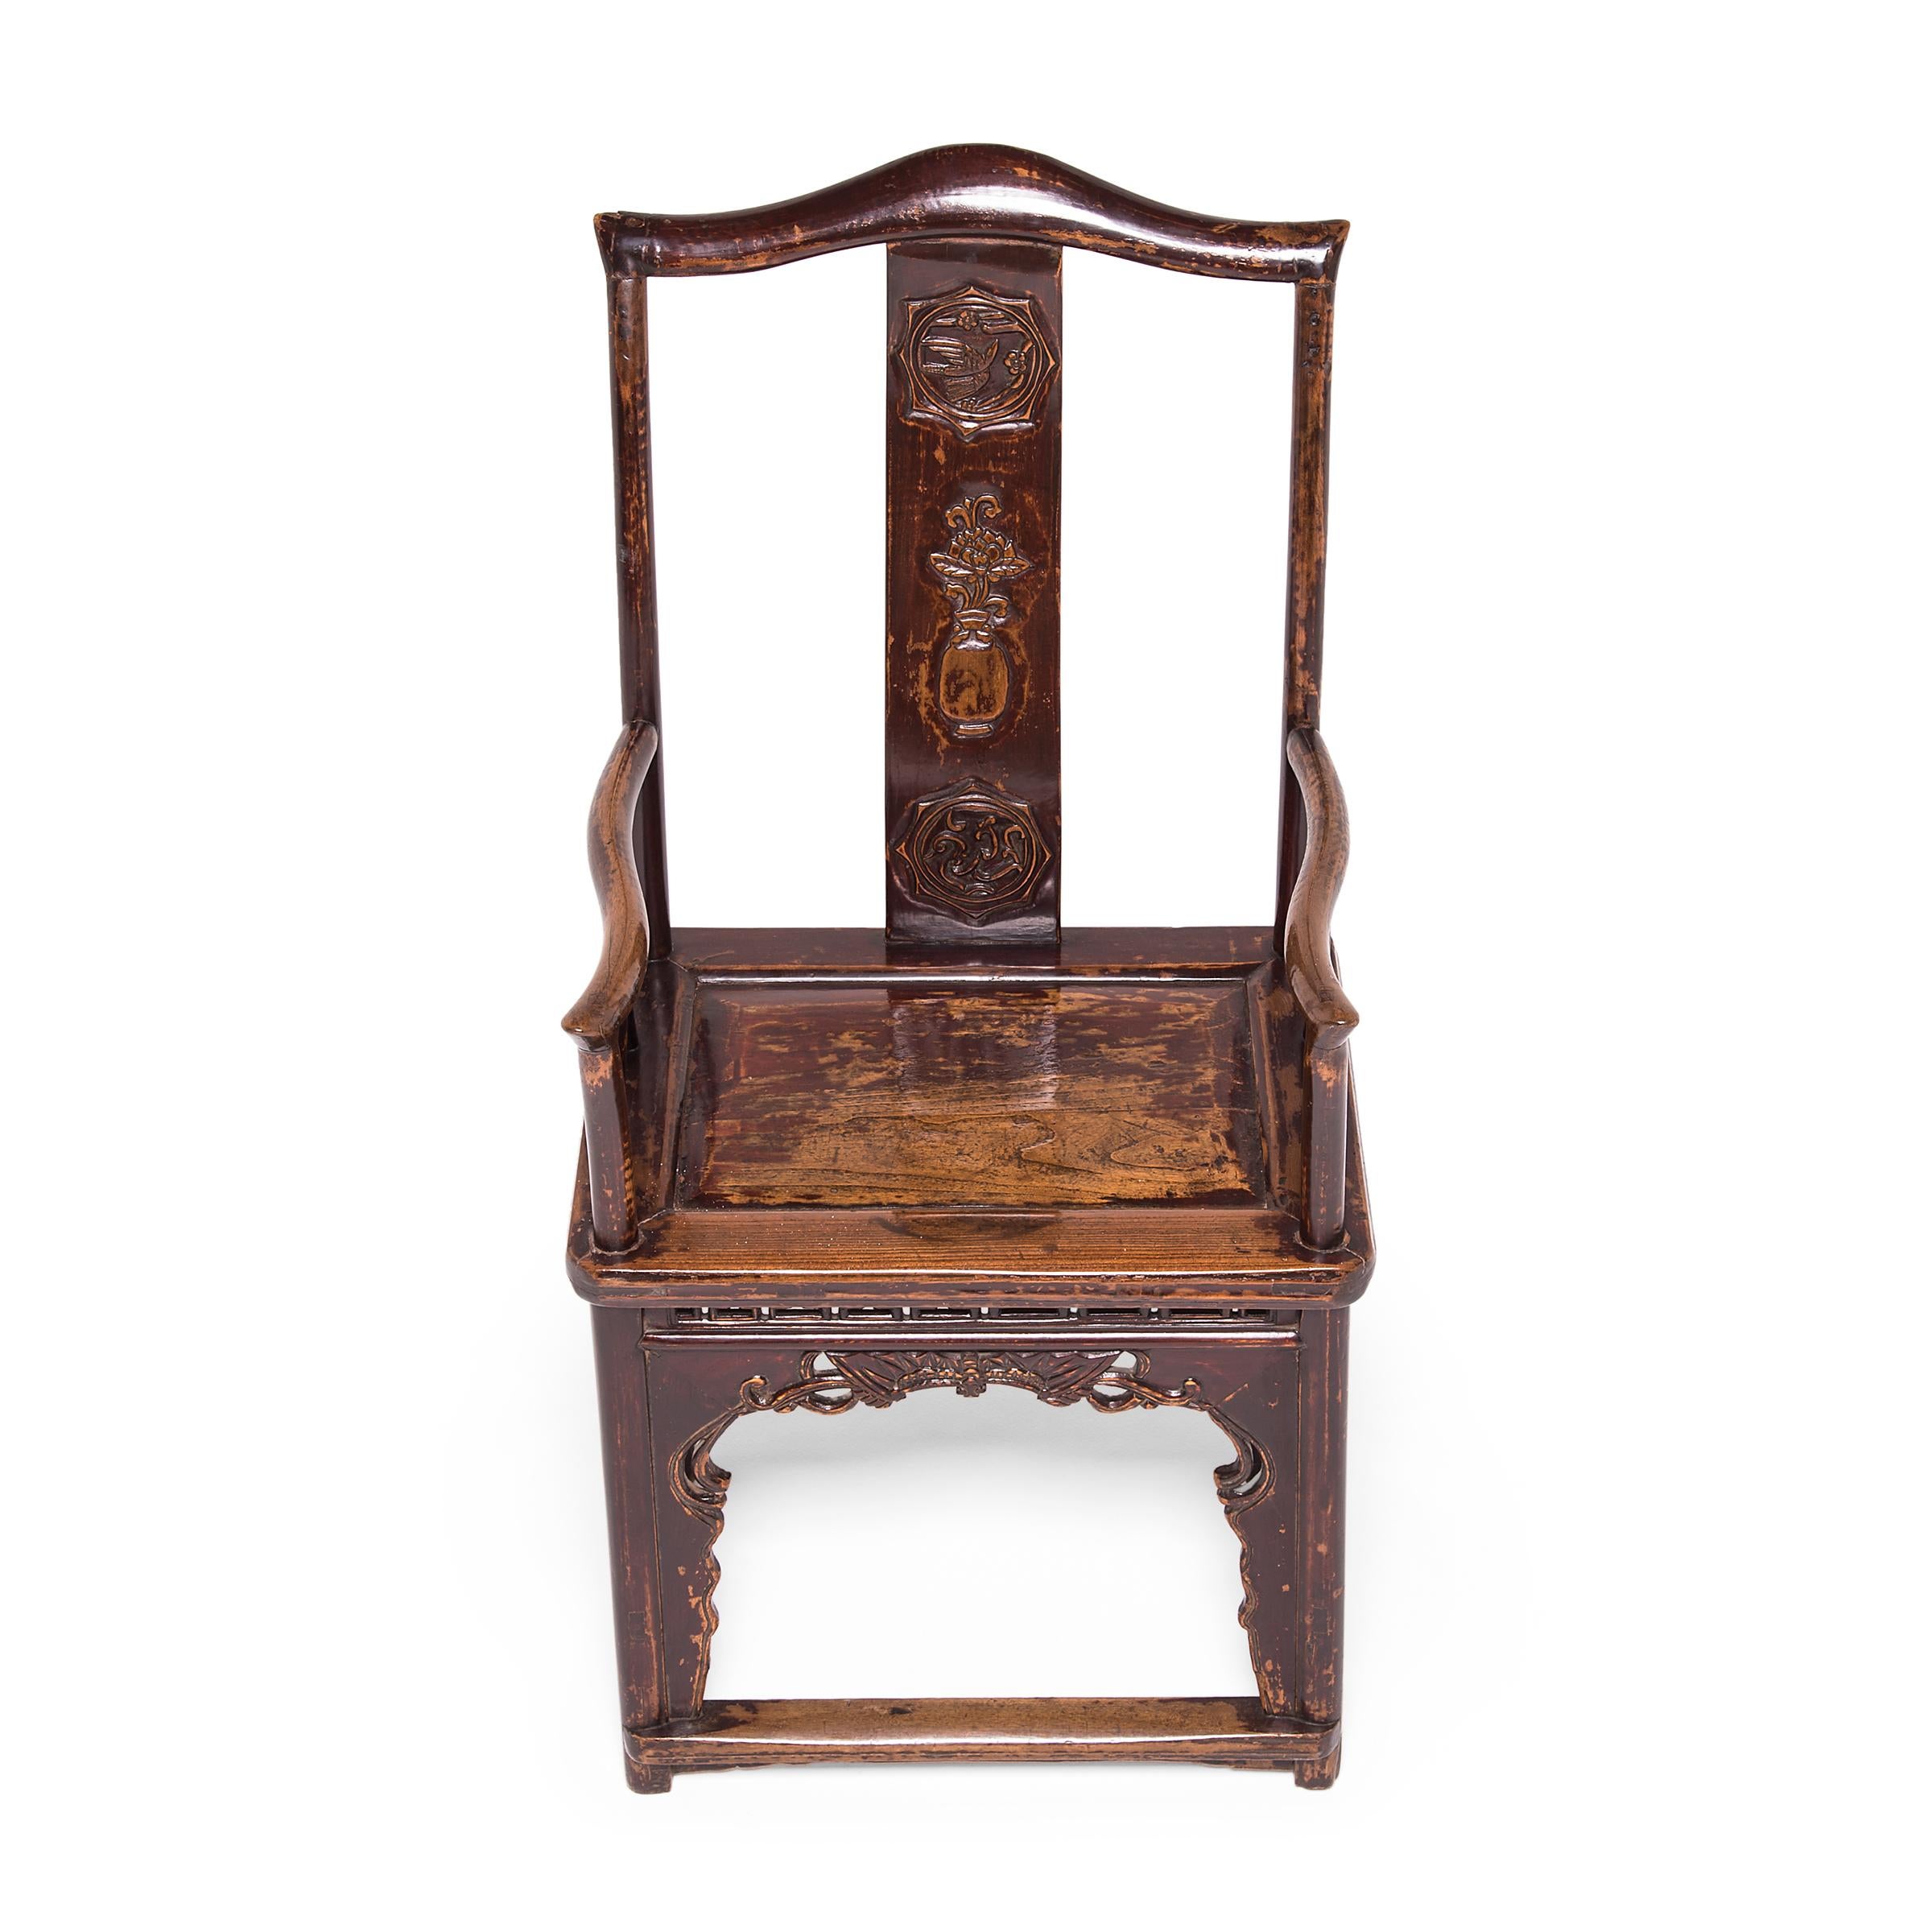 Pair of Chinese Southern Administrator's Chairs, c. 1850 For Sale 5